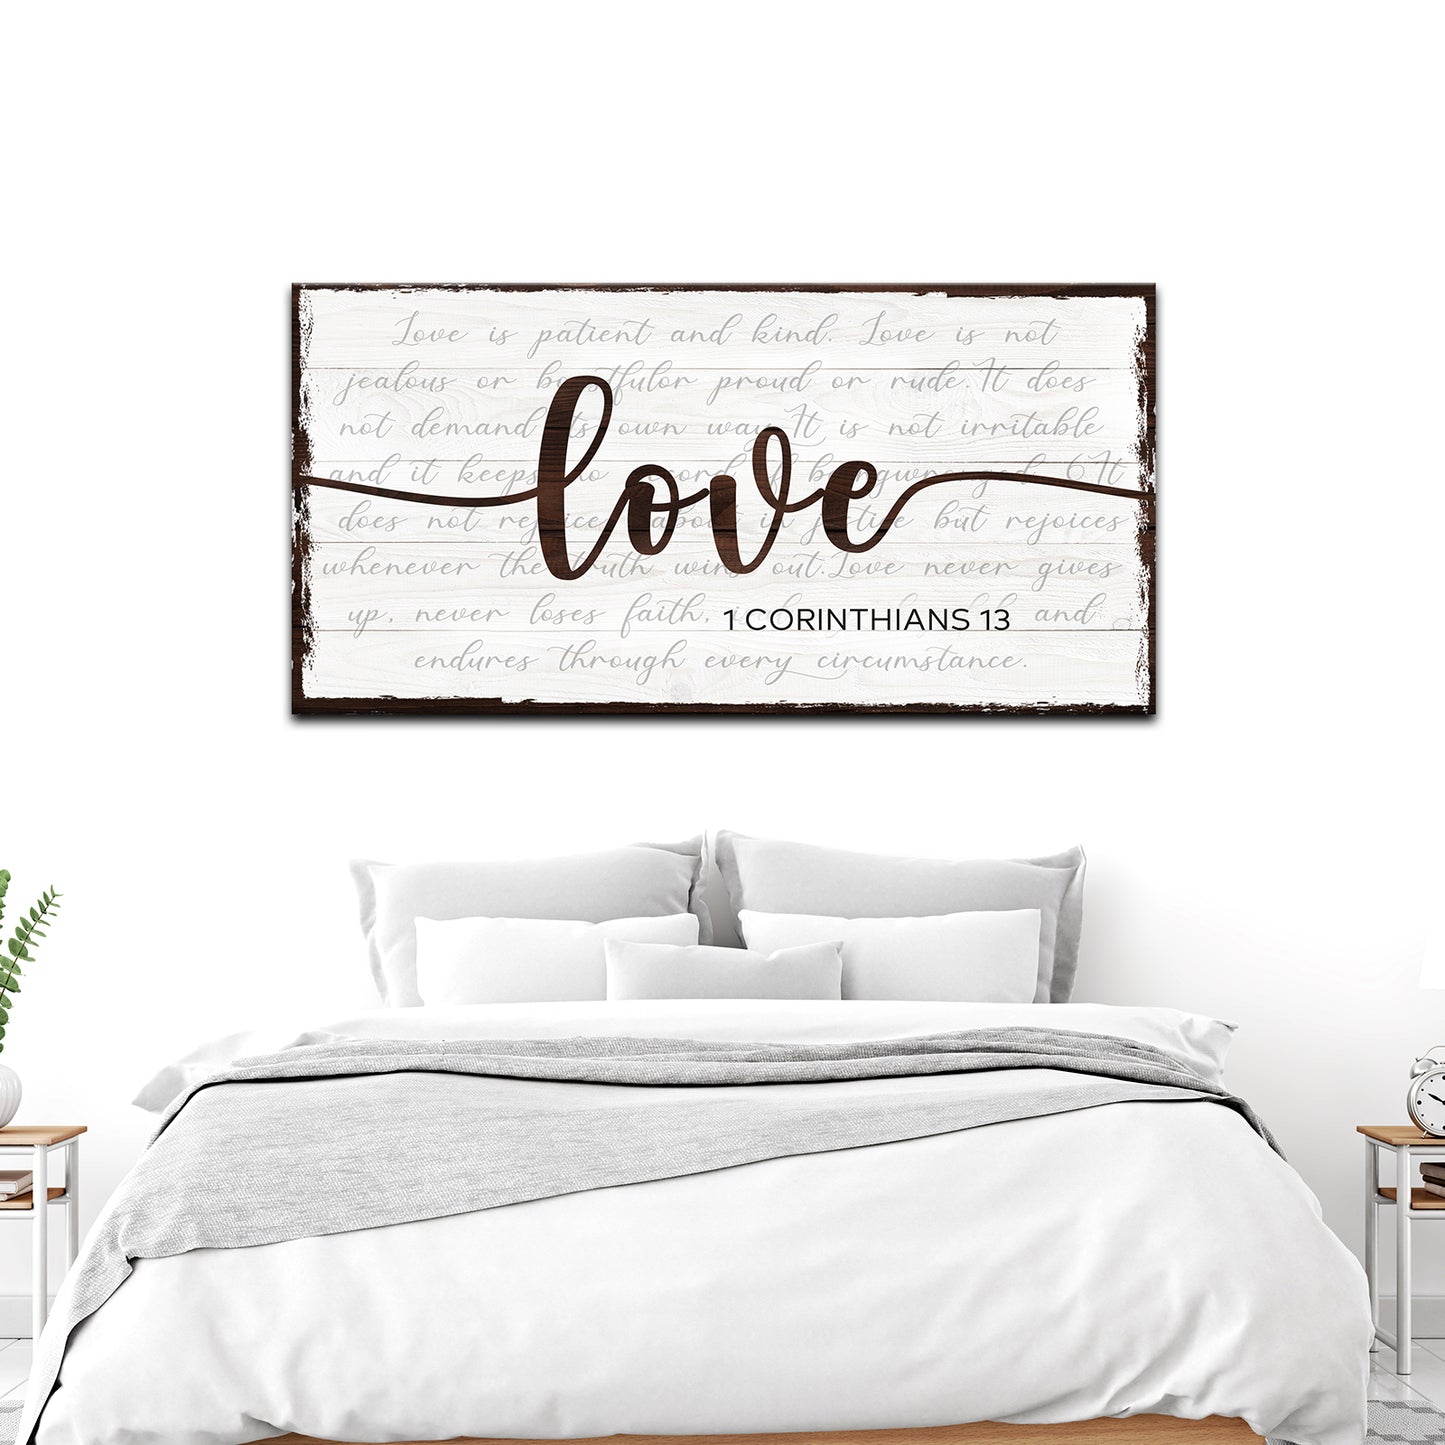 1 Corinthians 13 Scripture Sign - Image by Tailored Canvases